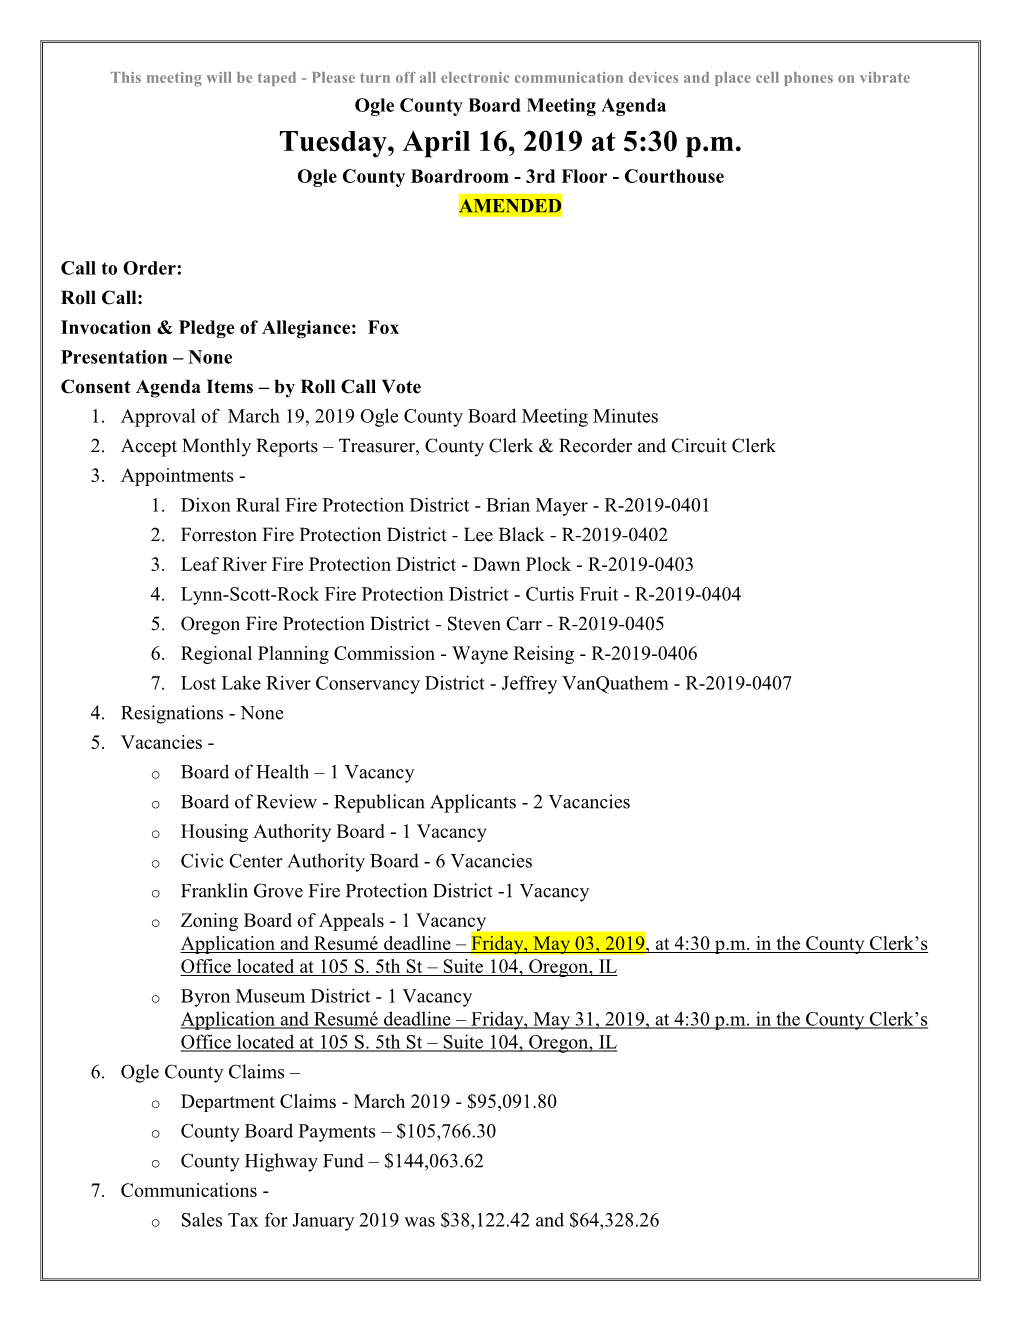 Tuesday, April 16, 2019 at 5:30 P.M. Ogle County Boardroom - 3Rd Floor - Courthouse AMENDED